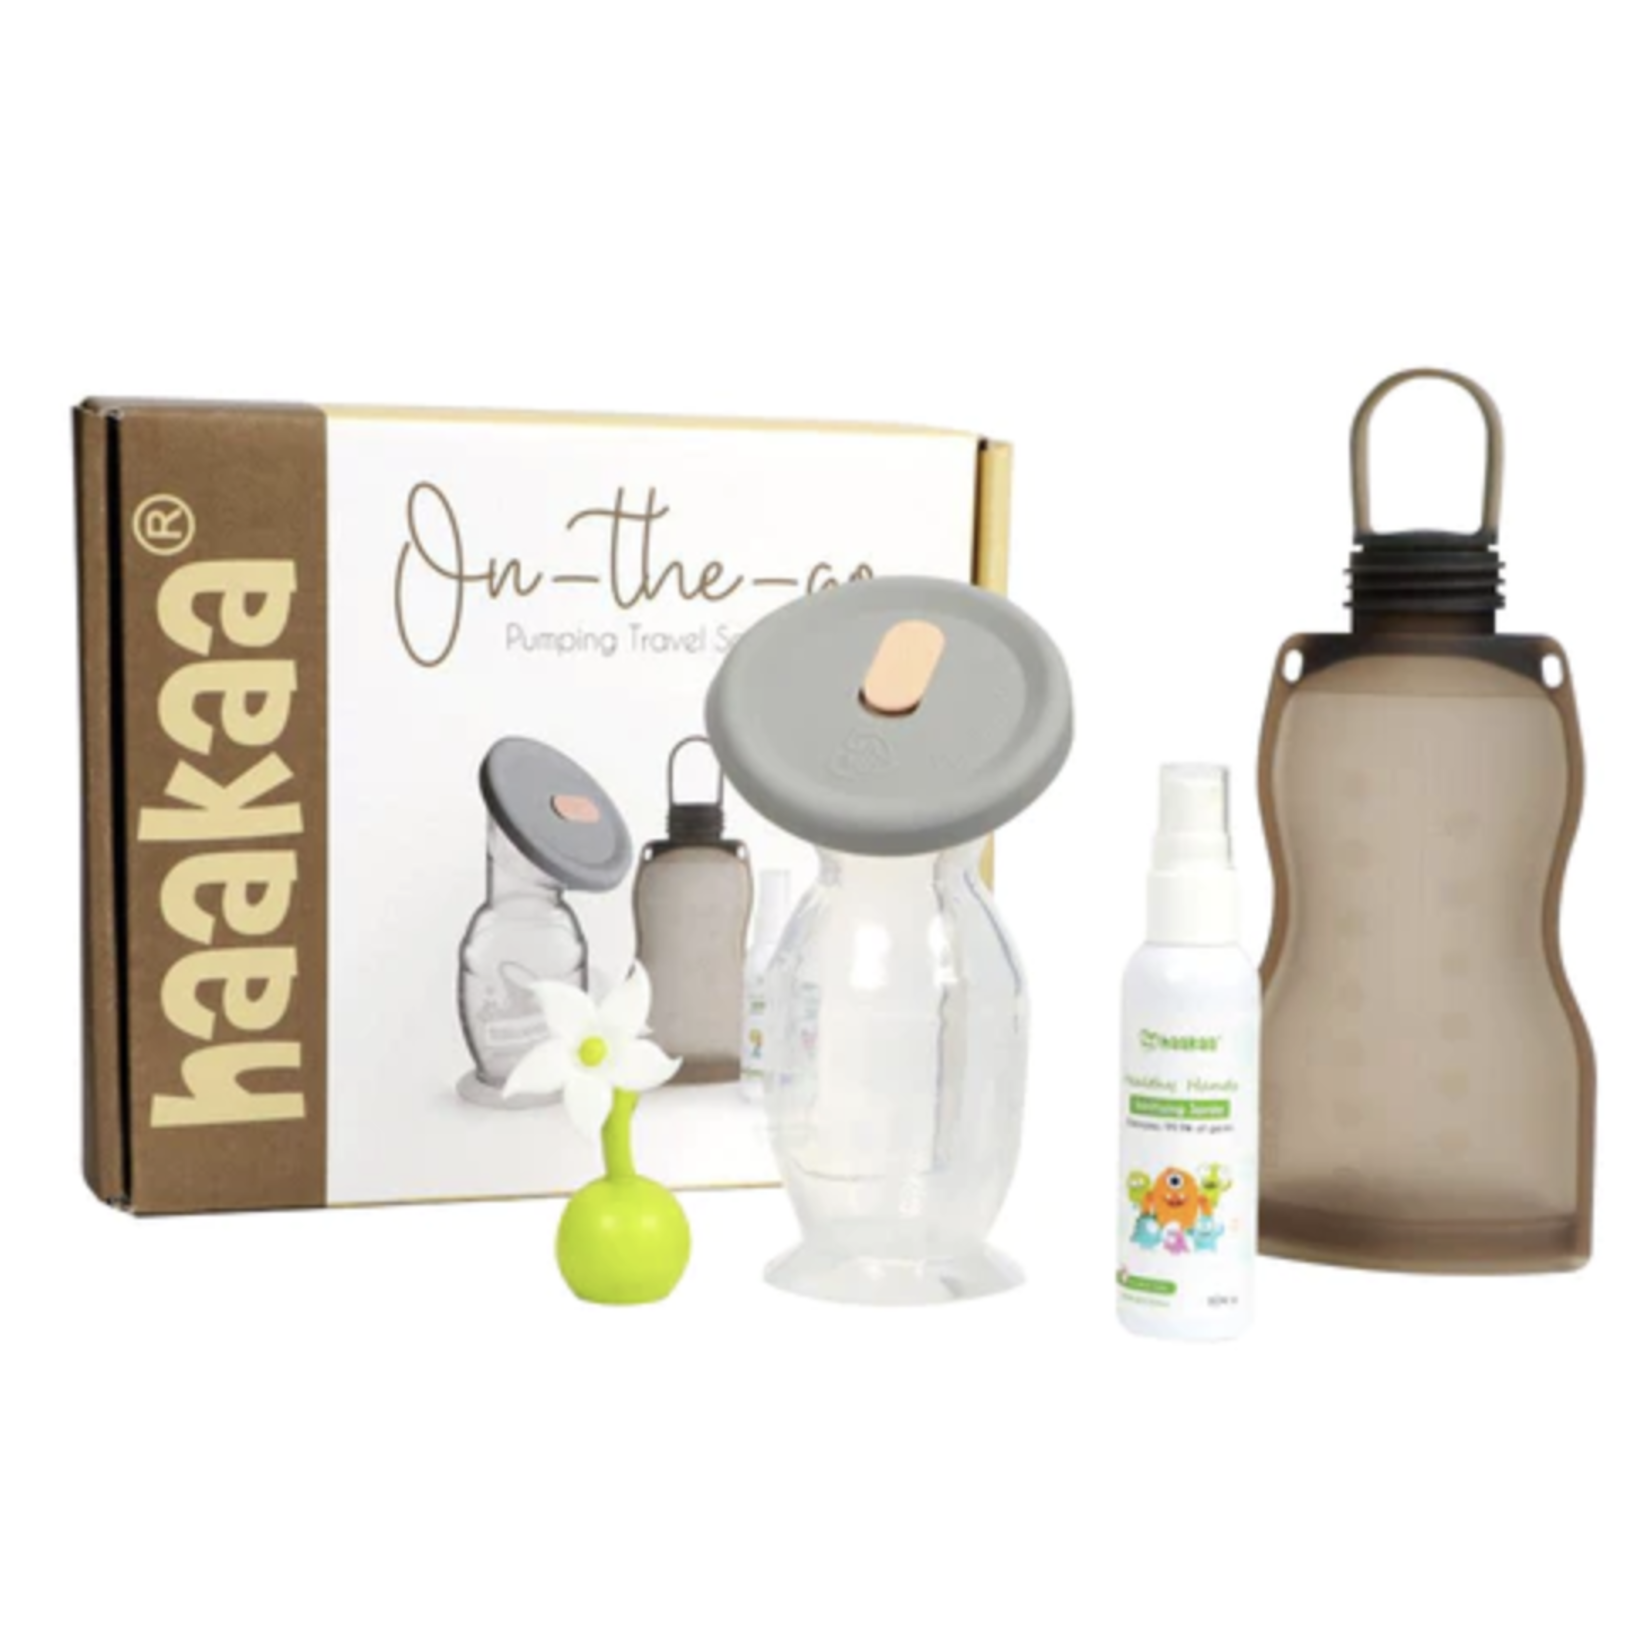 Haakaa On-The-Go Pumping Travel Set